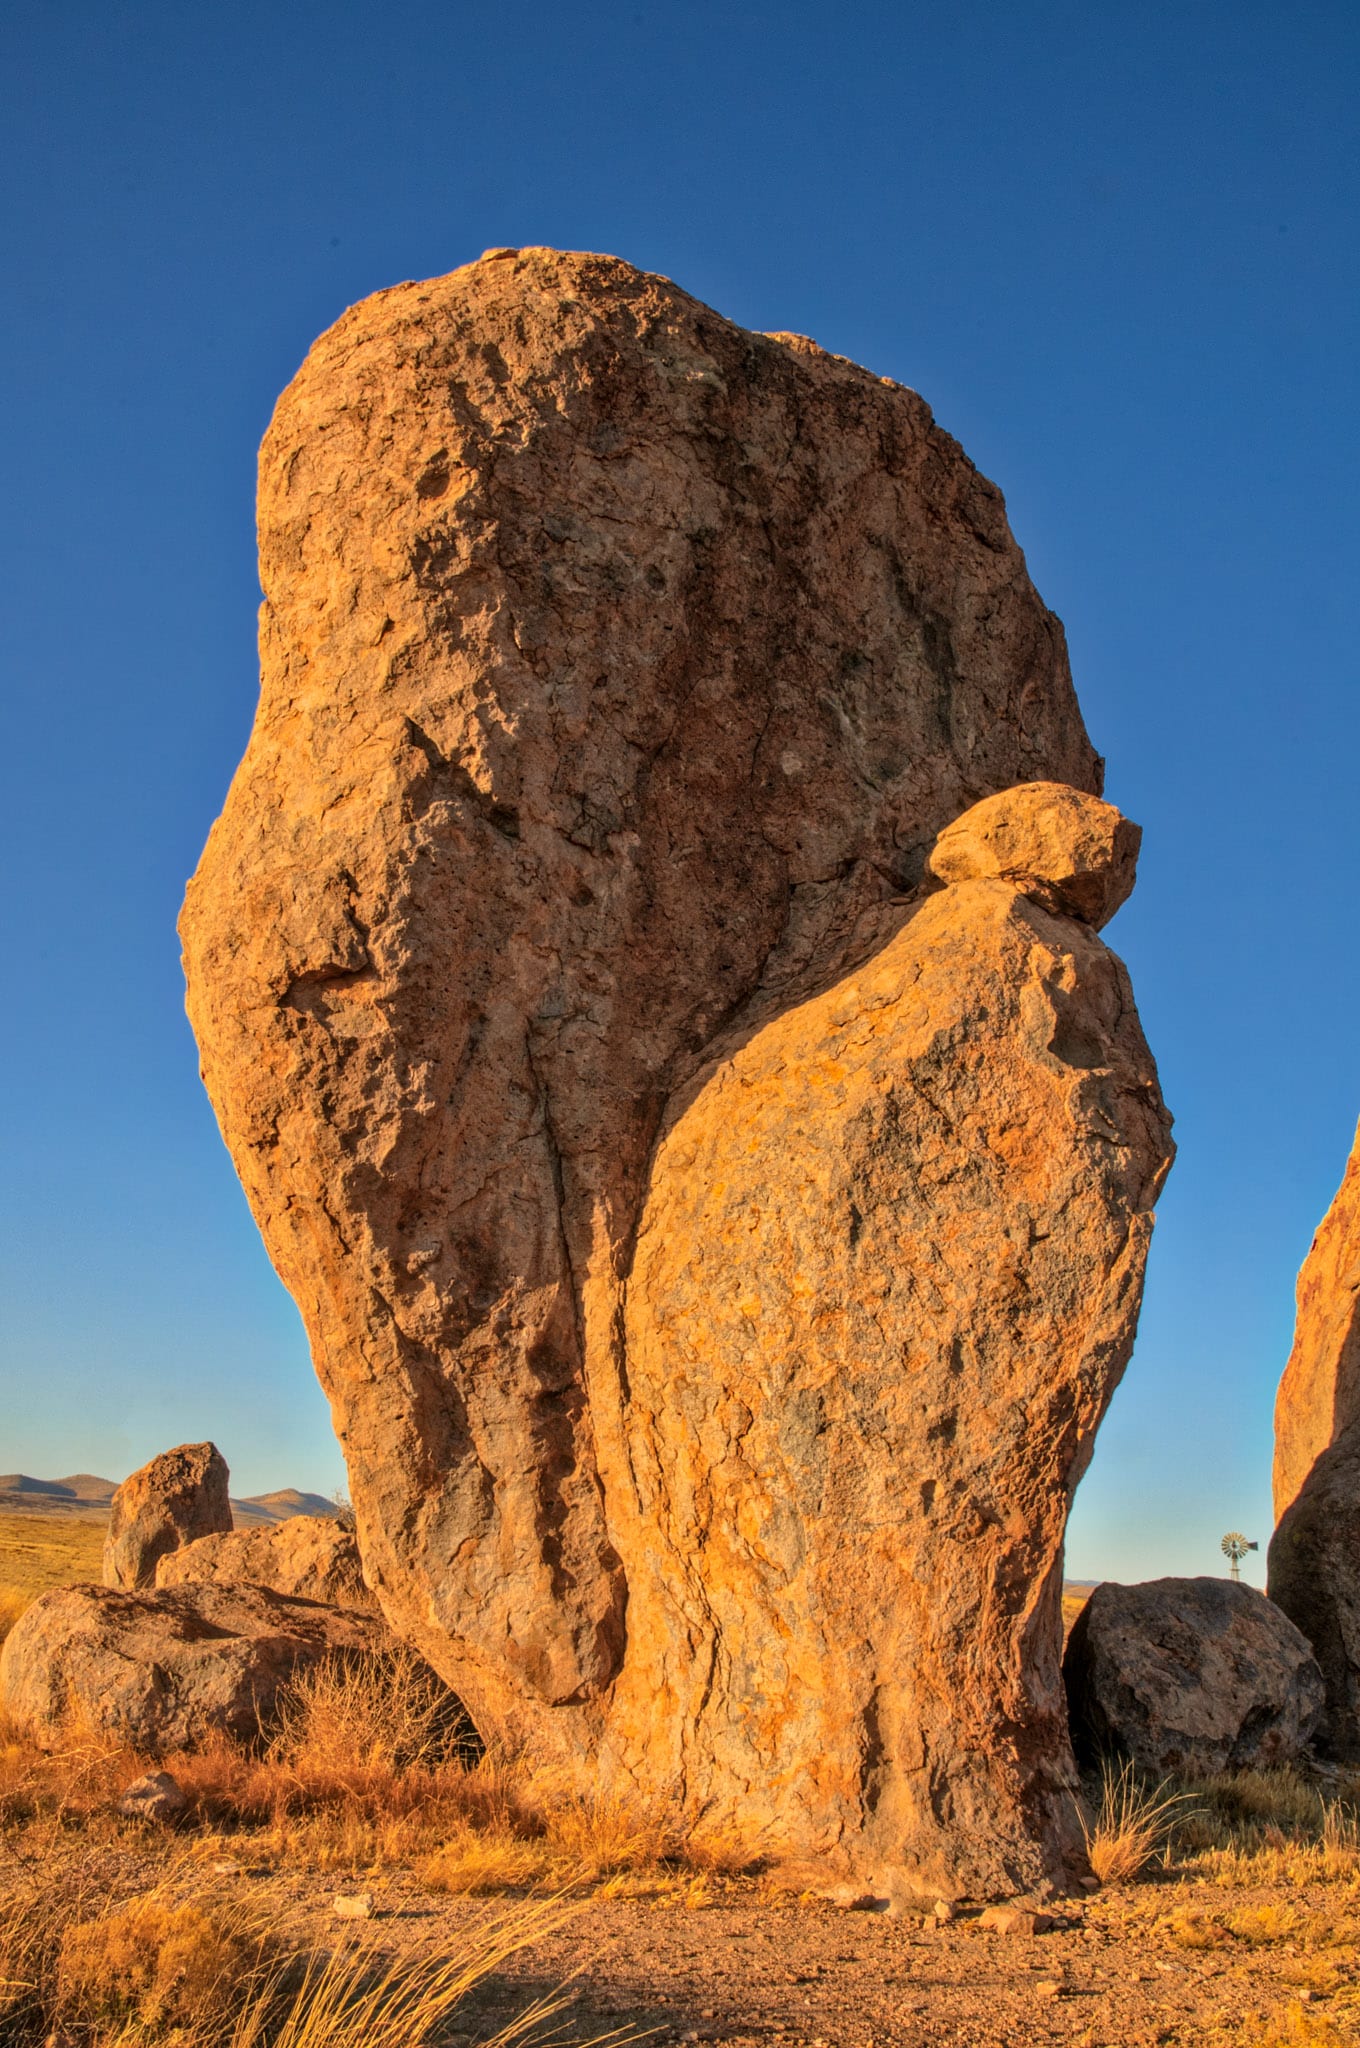 This eroded grouping of tuff pinnacles is evocative of a familiar religious scene. Taken in City of Rocks State Park, New Mexico.